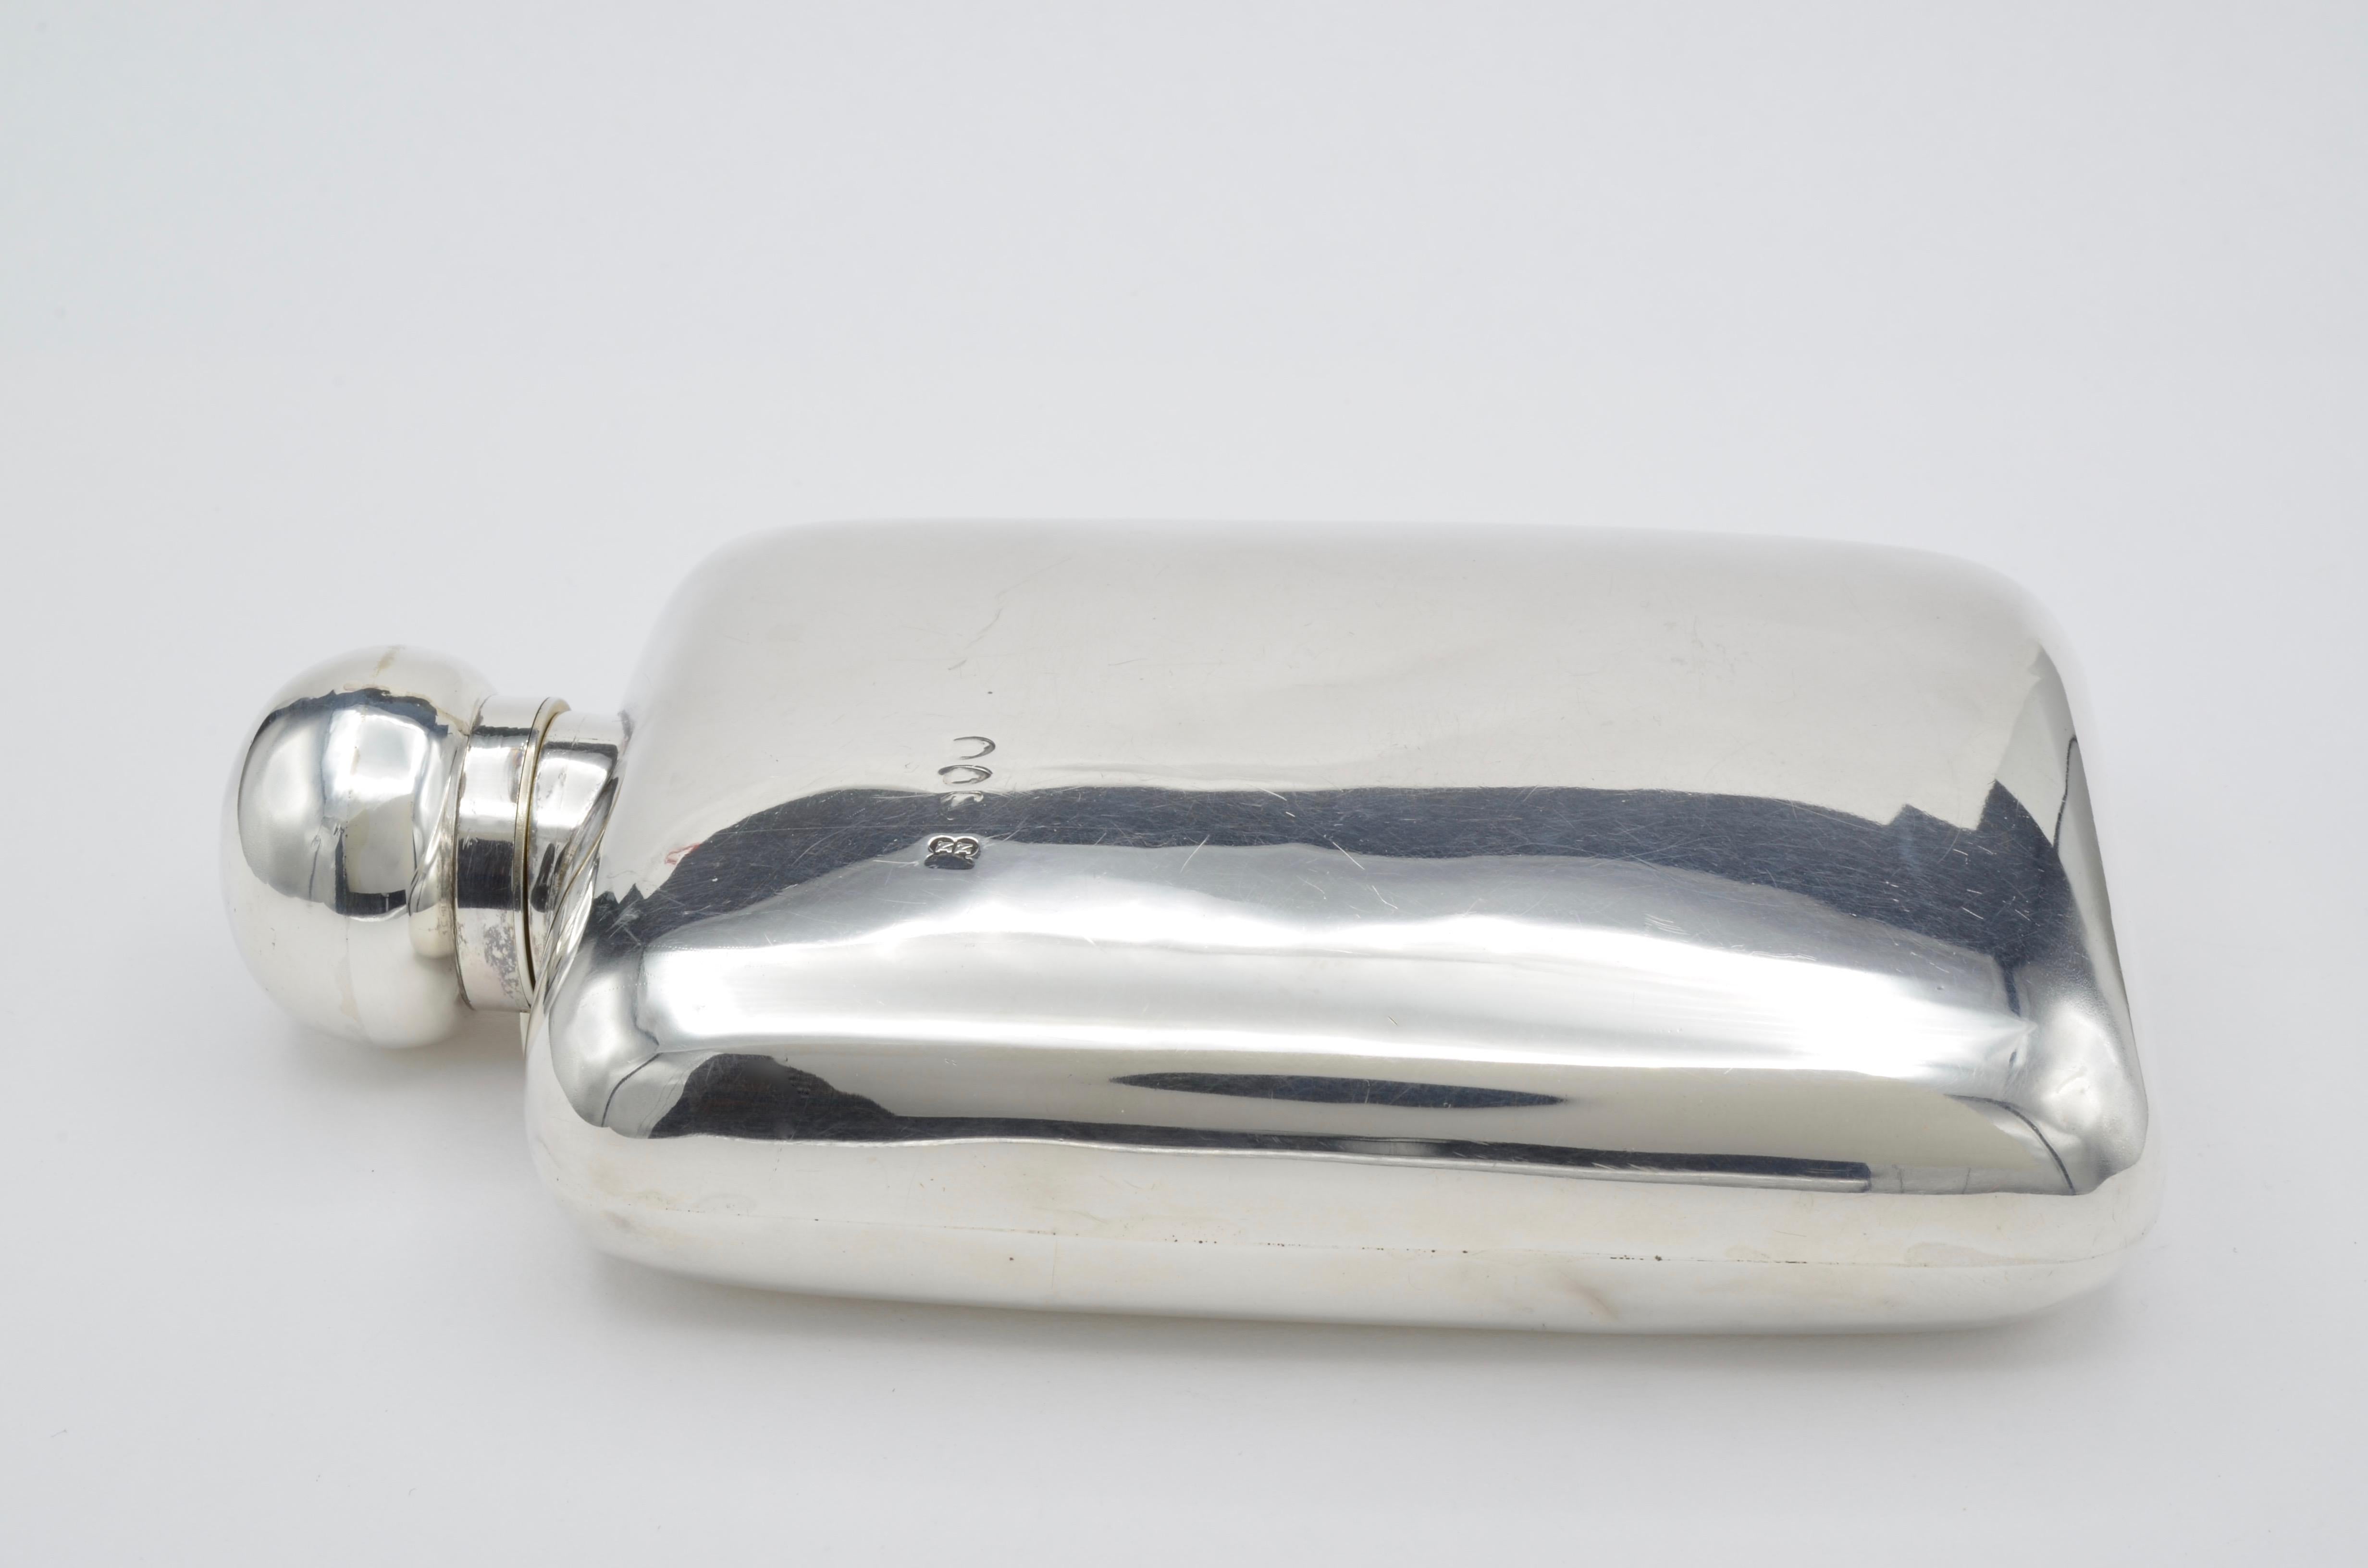 This beautiful sterling silver flask is from the 1860's. The screw top is well designed and secure. The feel of it is yummy smooth and fits nicely in your hand! Any occasion for 'warmth in a bottle' this flask is the key!